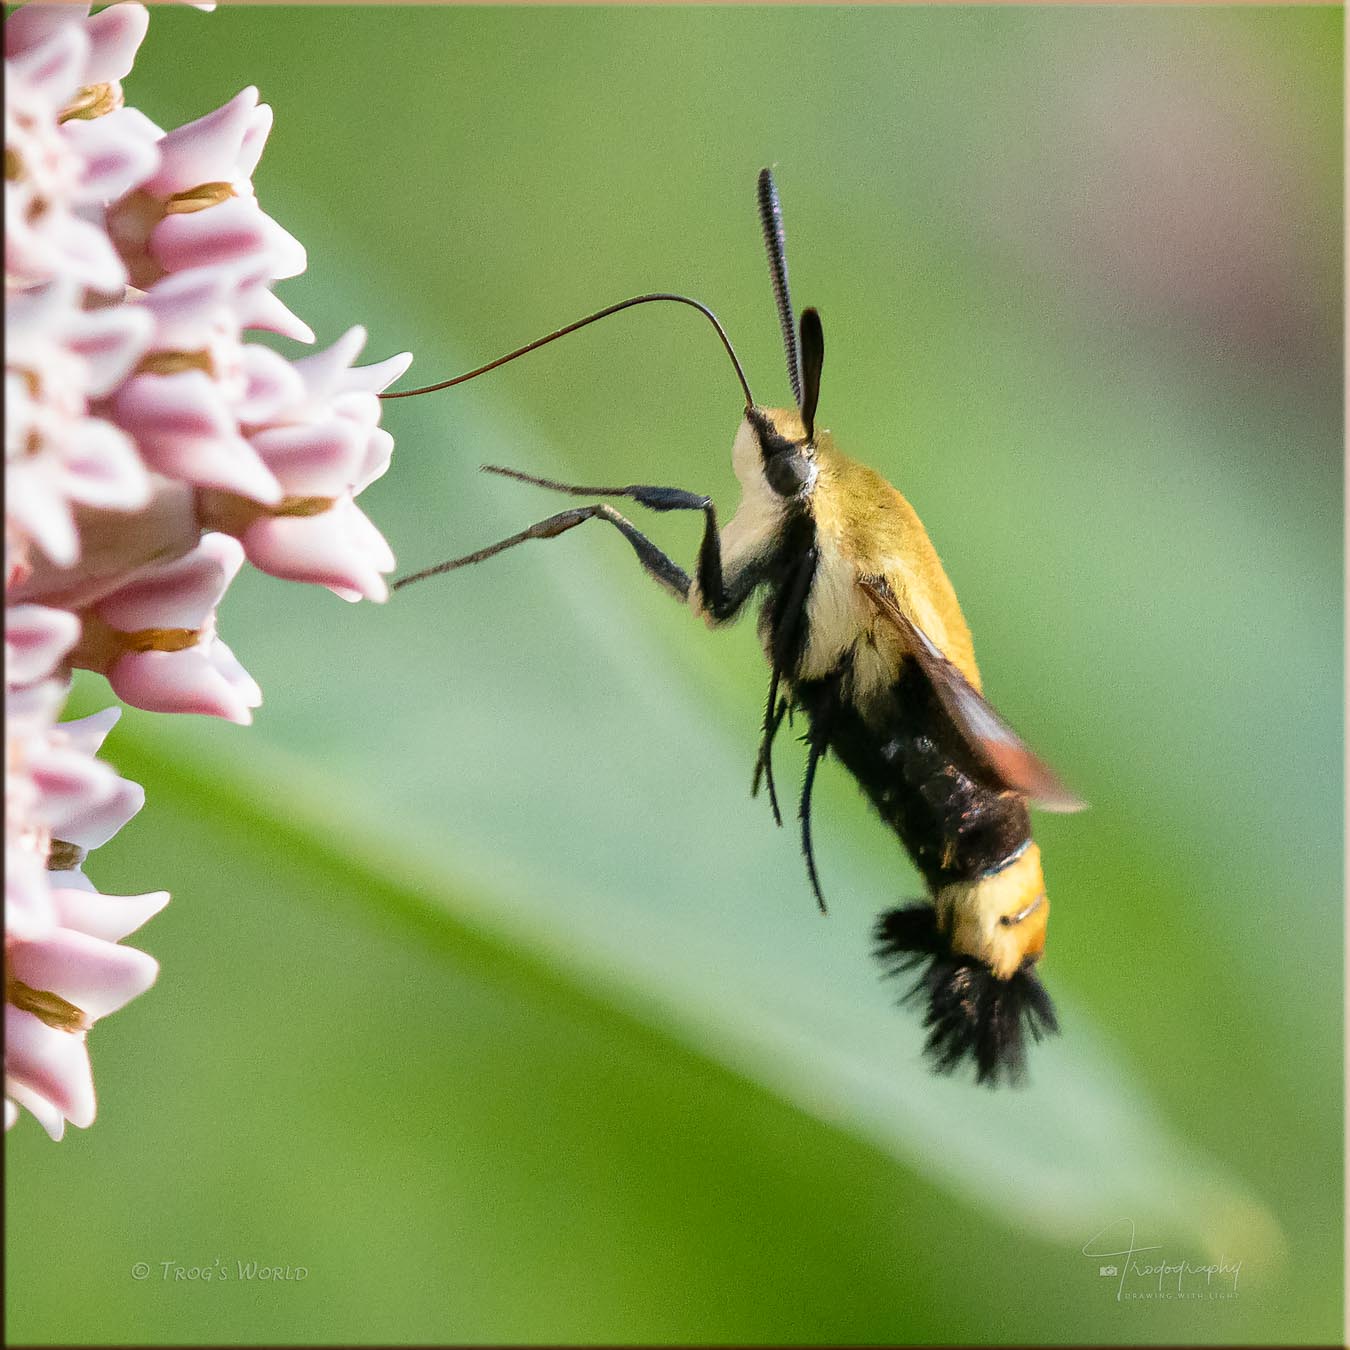 A Snowberry Clearwing Moth enjoying a milkweed